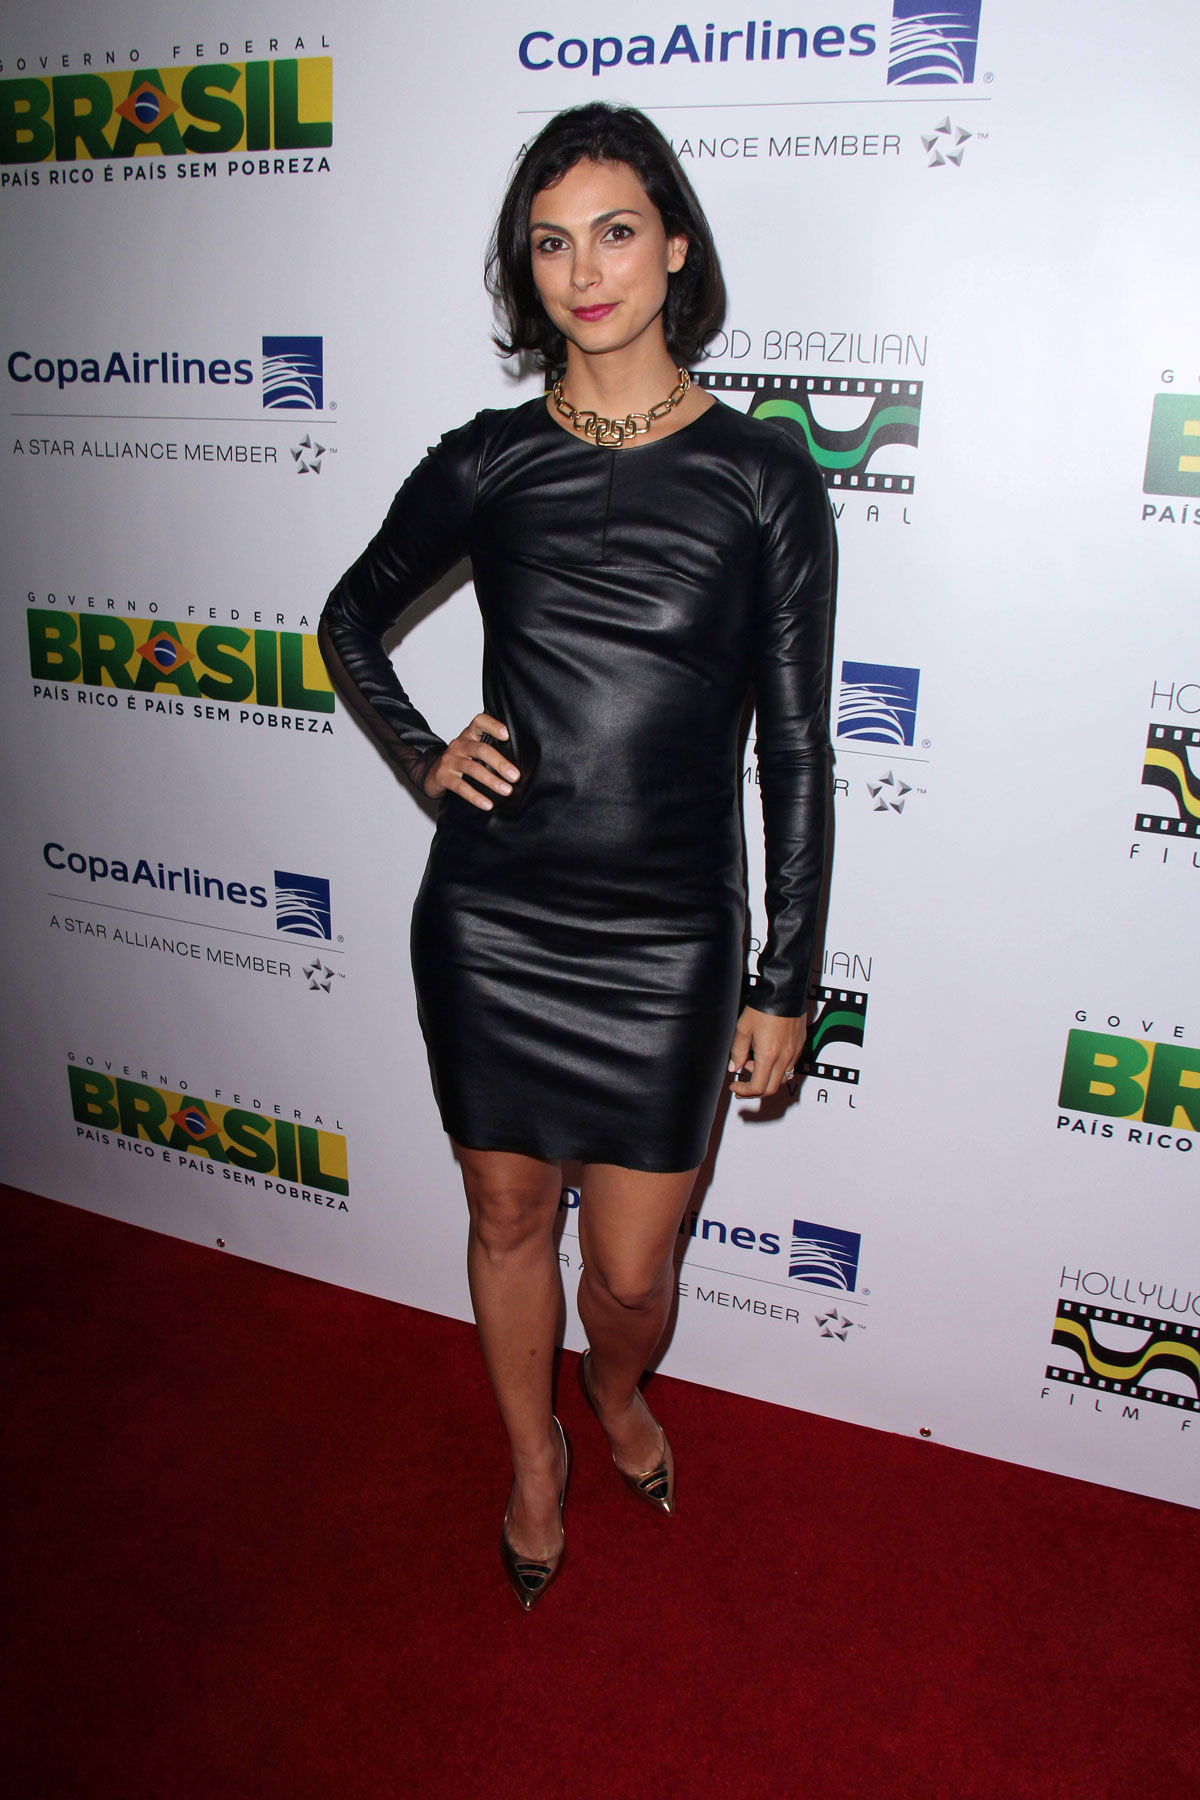 Morena Baccarin attends 6th Annual Hollywood Brazilian Film Festival opening night gala